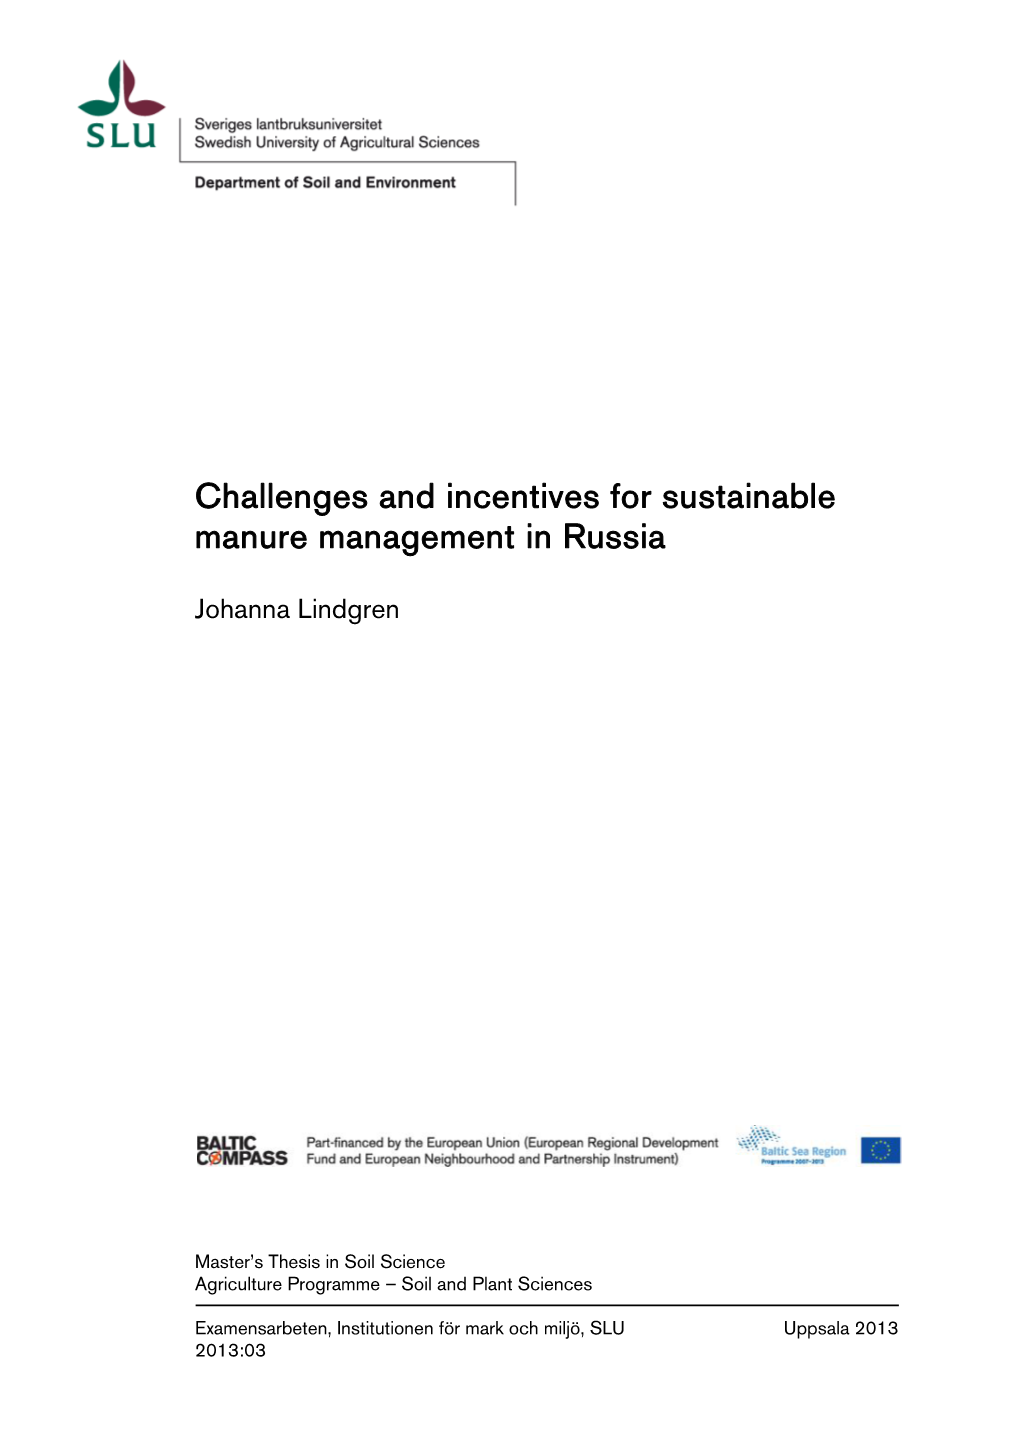 Challenges and Incentives for Sustainable Manure Management in Russia